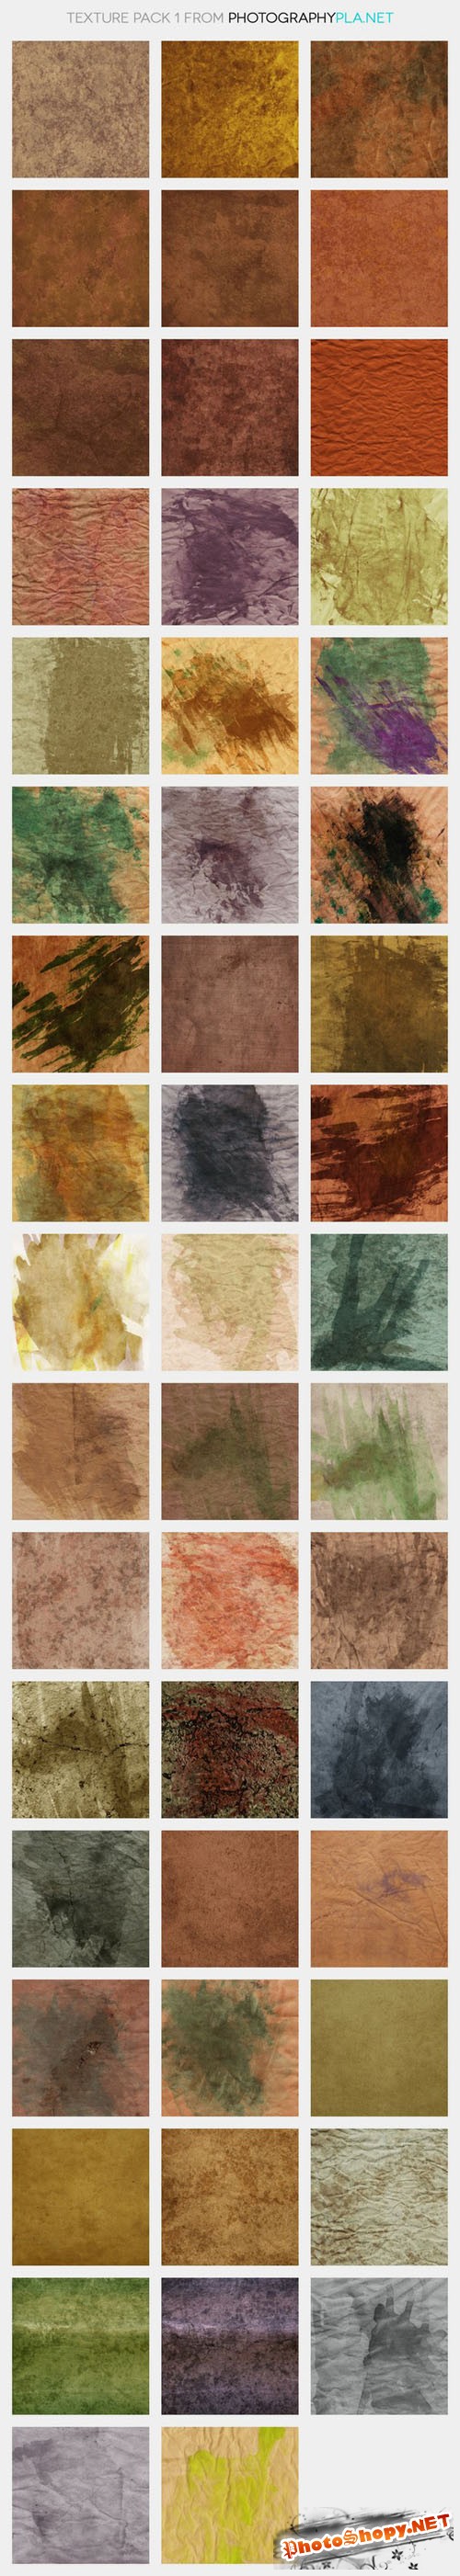 50 High-Res Textures Pack 1